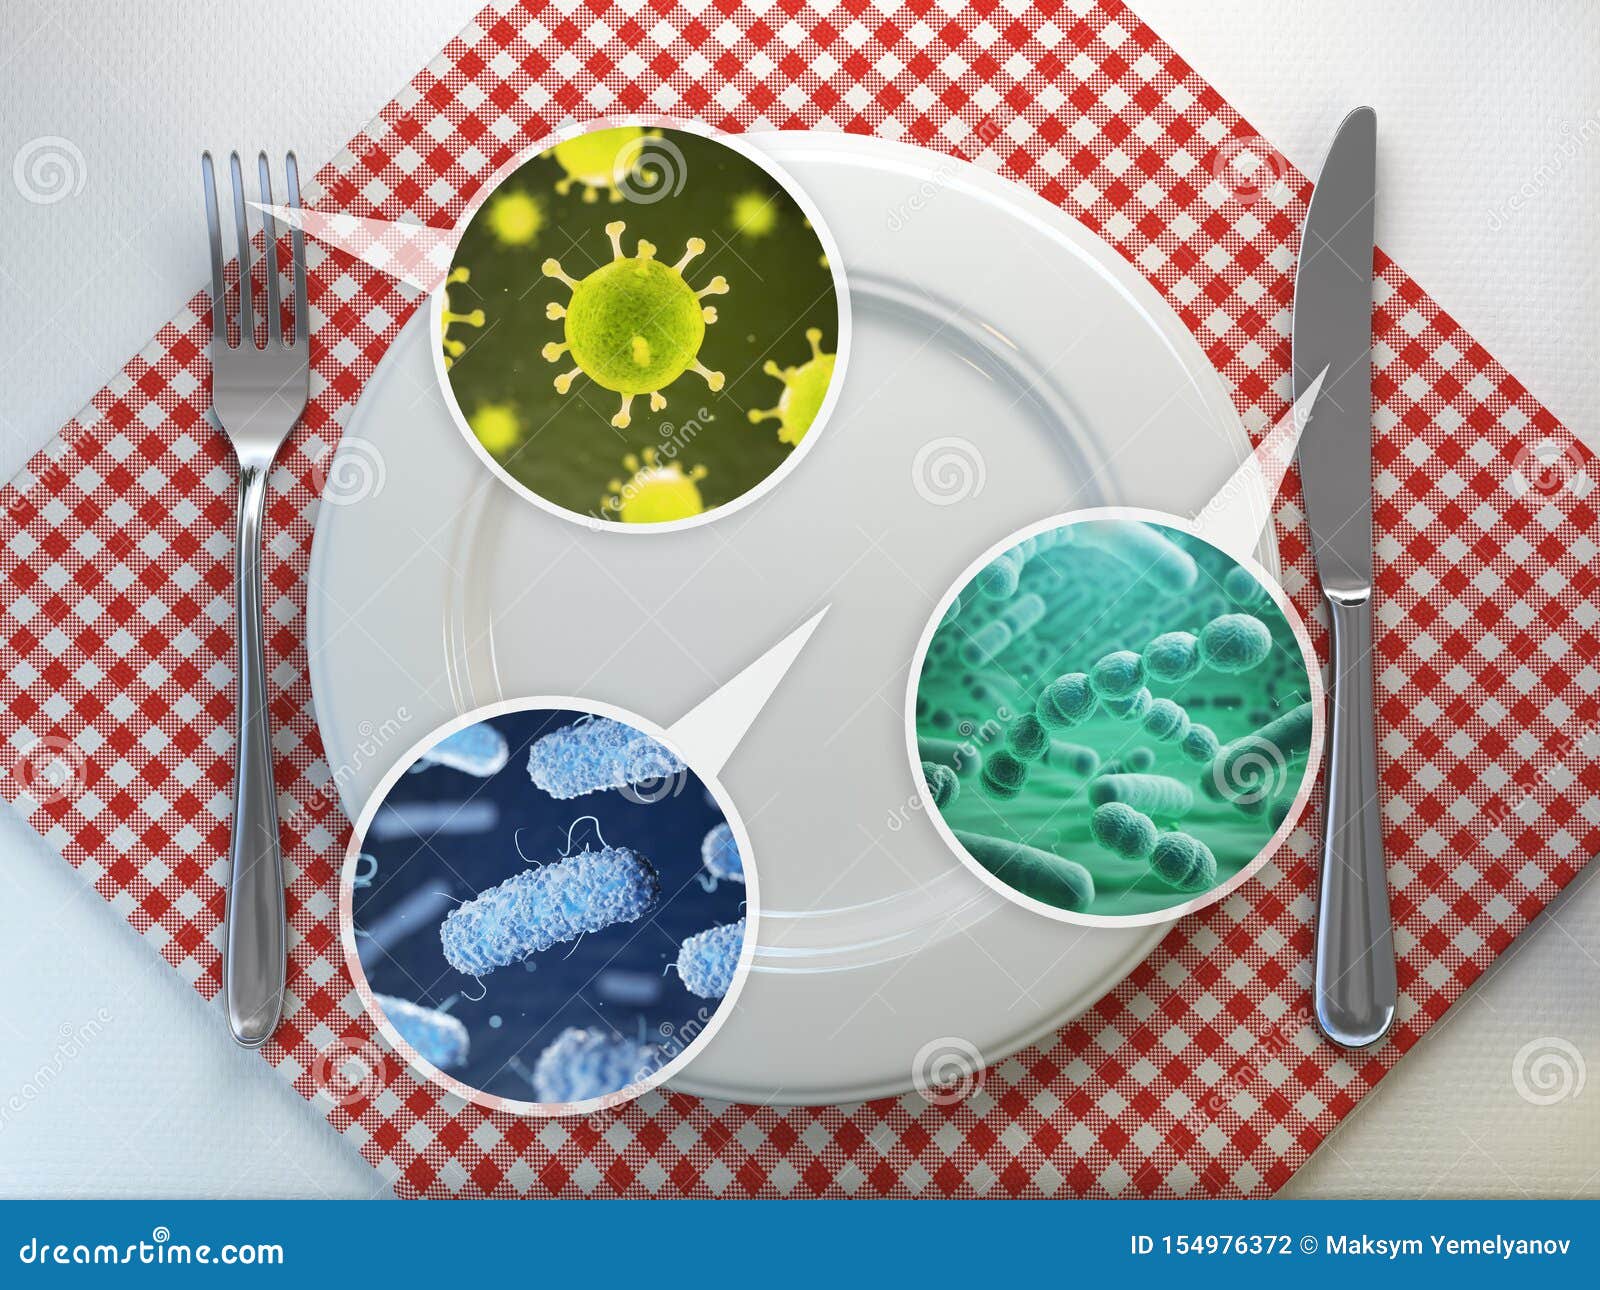 dirty kitchen utensils  and food bactery concept. utensils plate, fork and spoon with bacteries and viruses